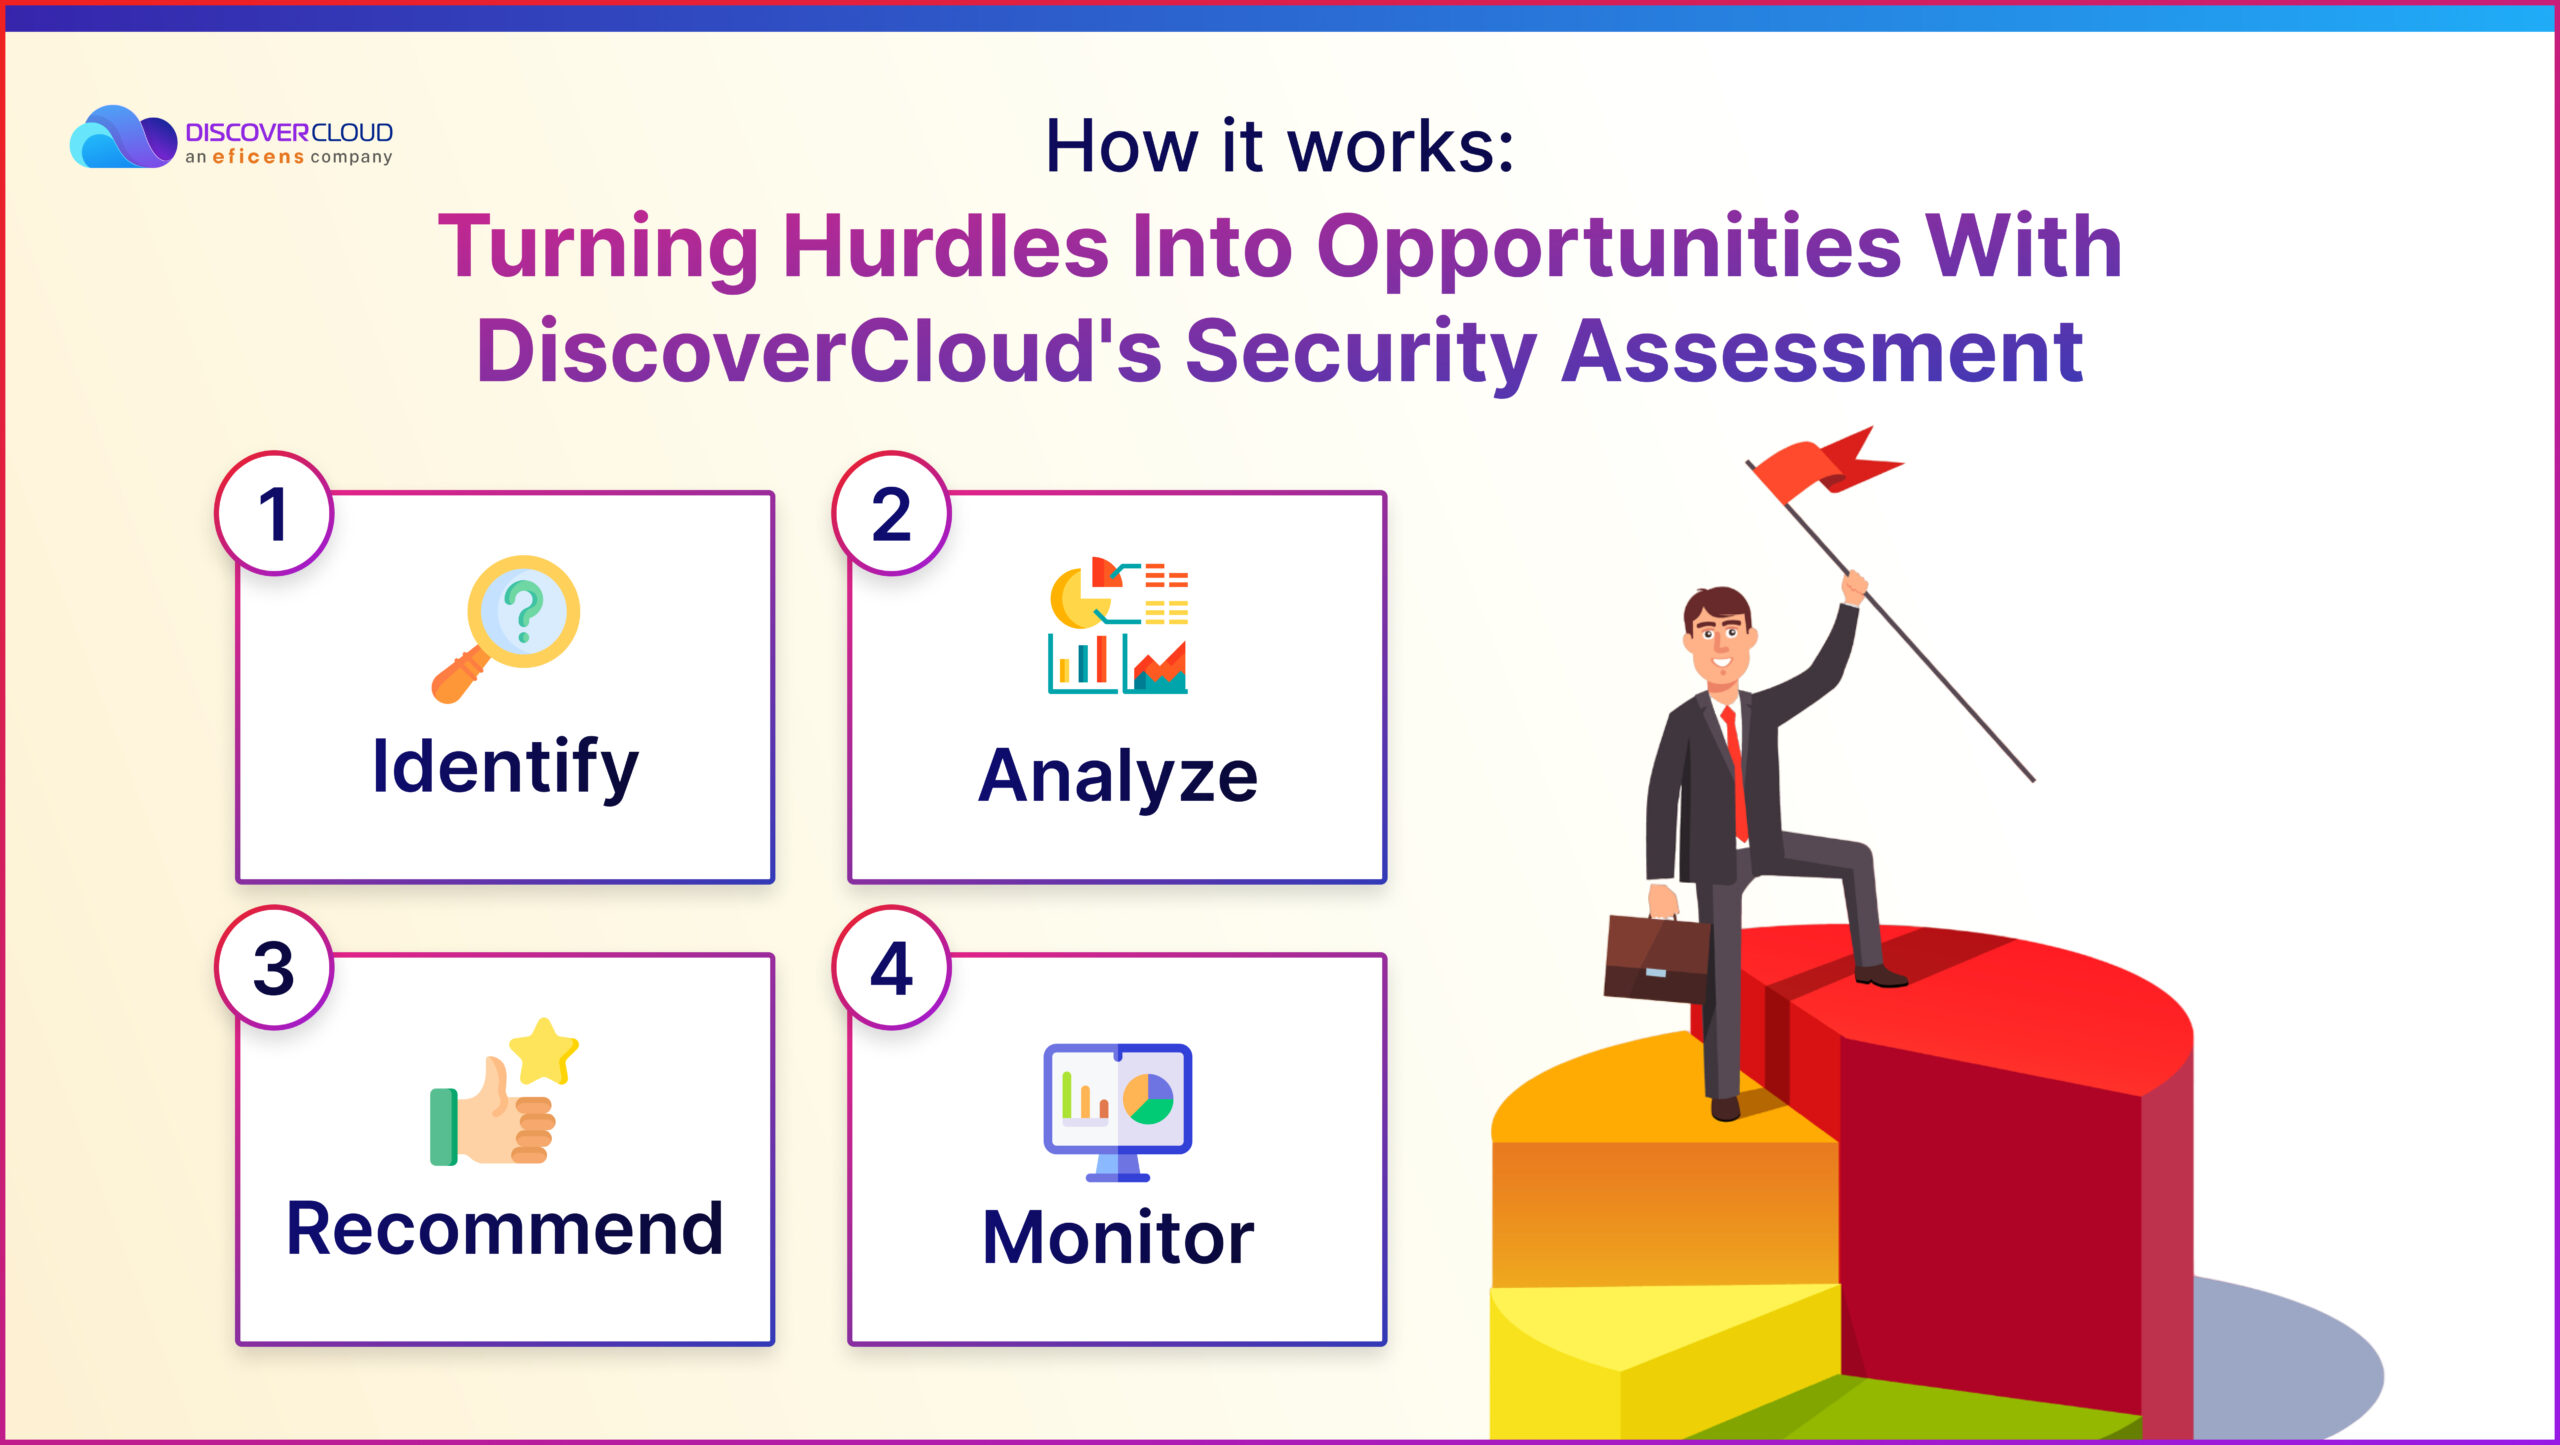 How it works: Turning Hurdles Into Opportunities With DiscoverCloud’s Security Assessment